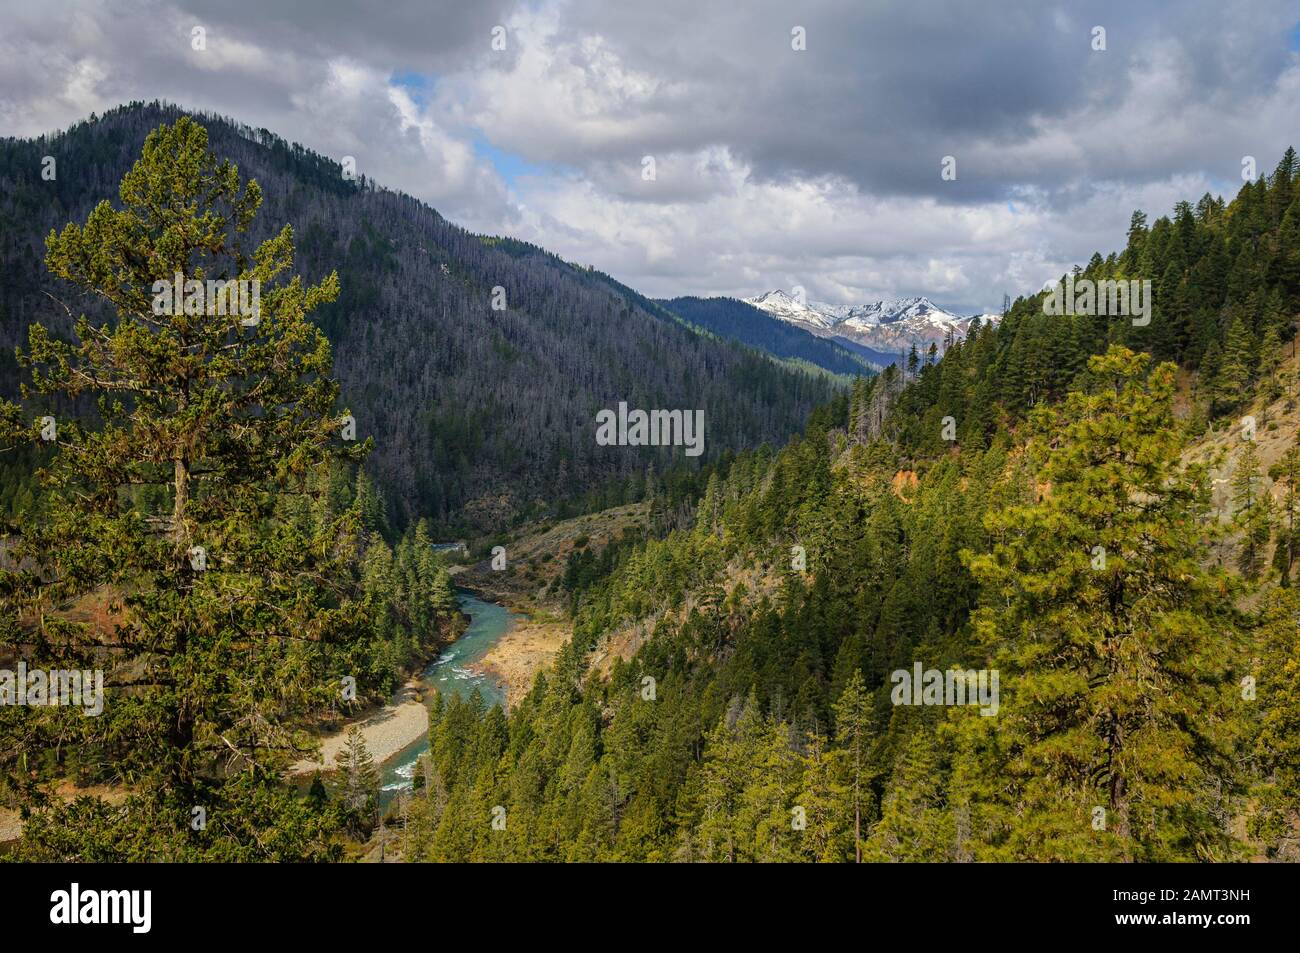 The Wild and Scenic Illinois River in the Siskiyou Mountains of southwestern Oregon. Stock Photo